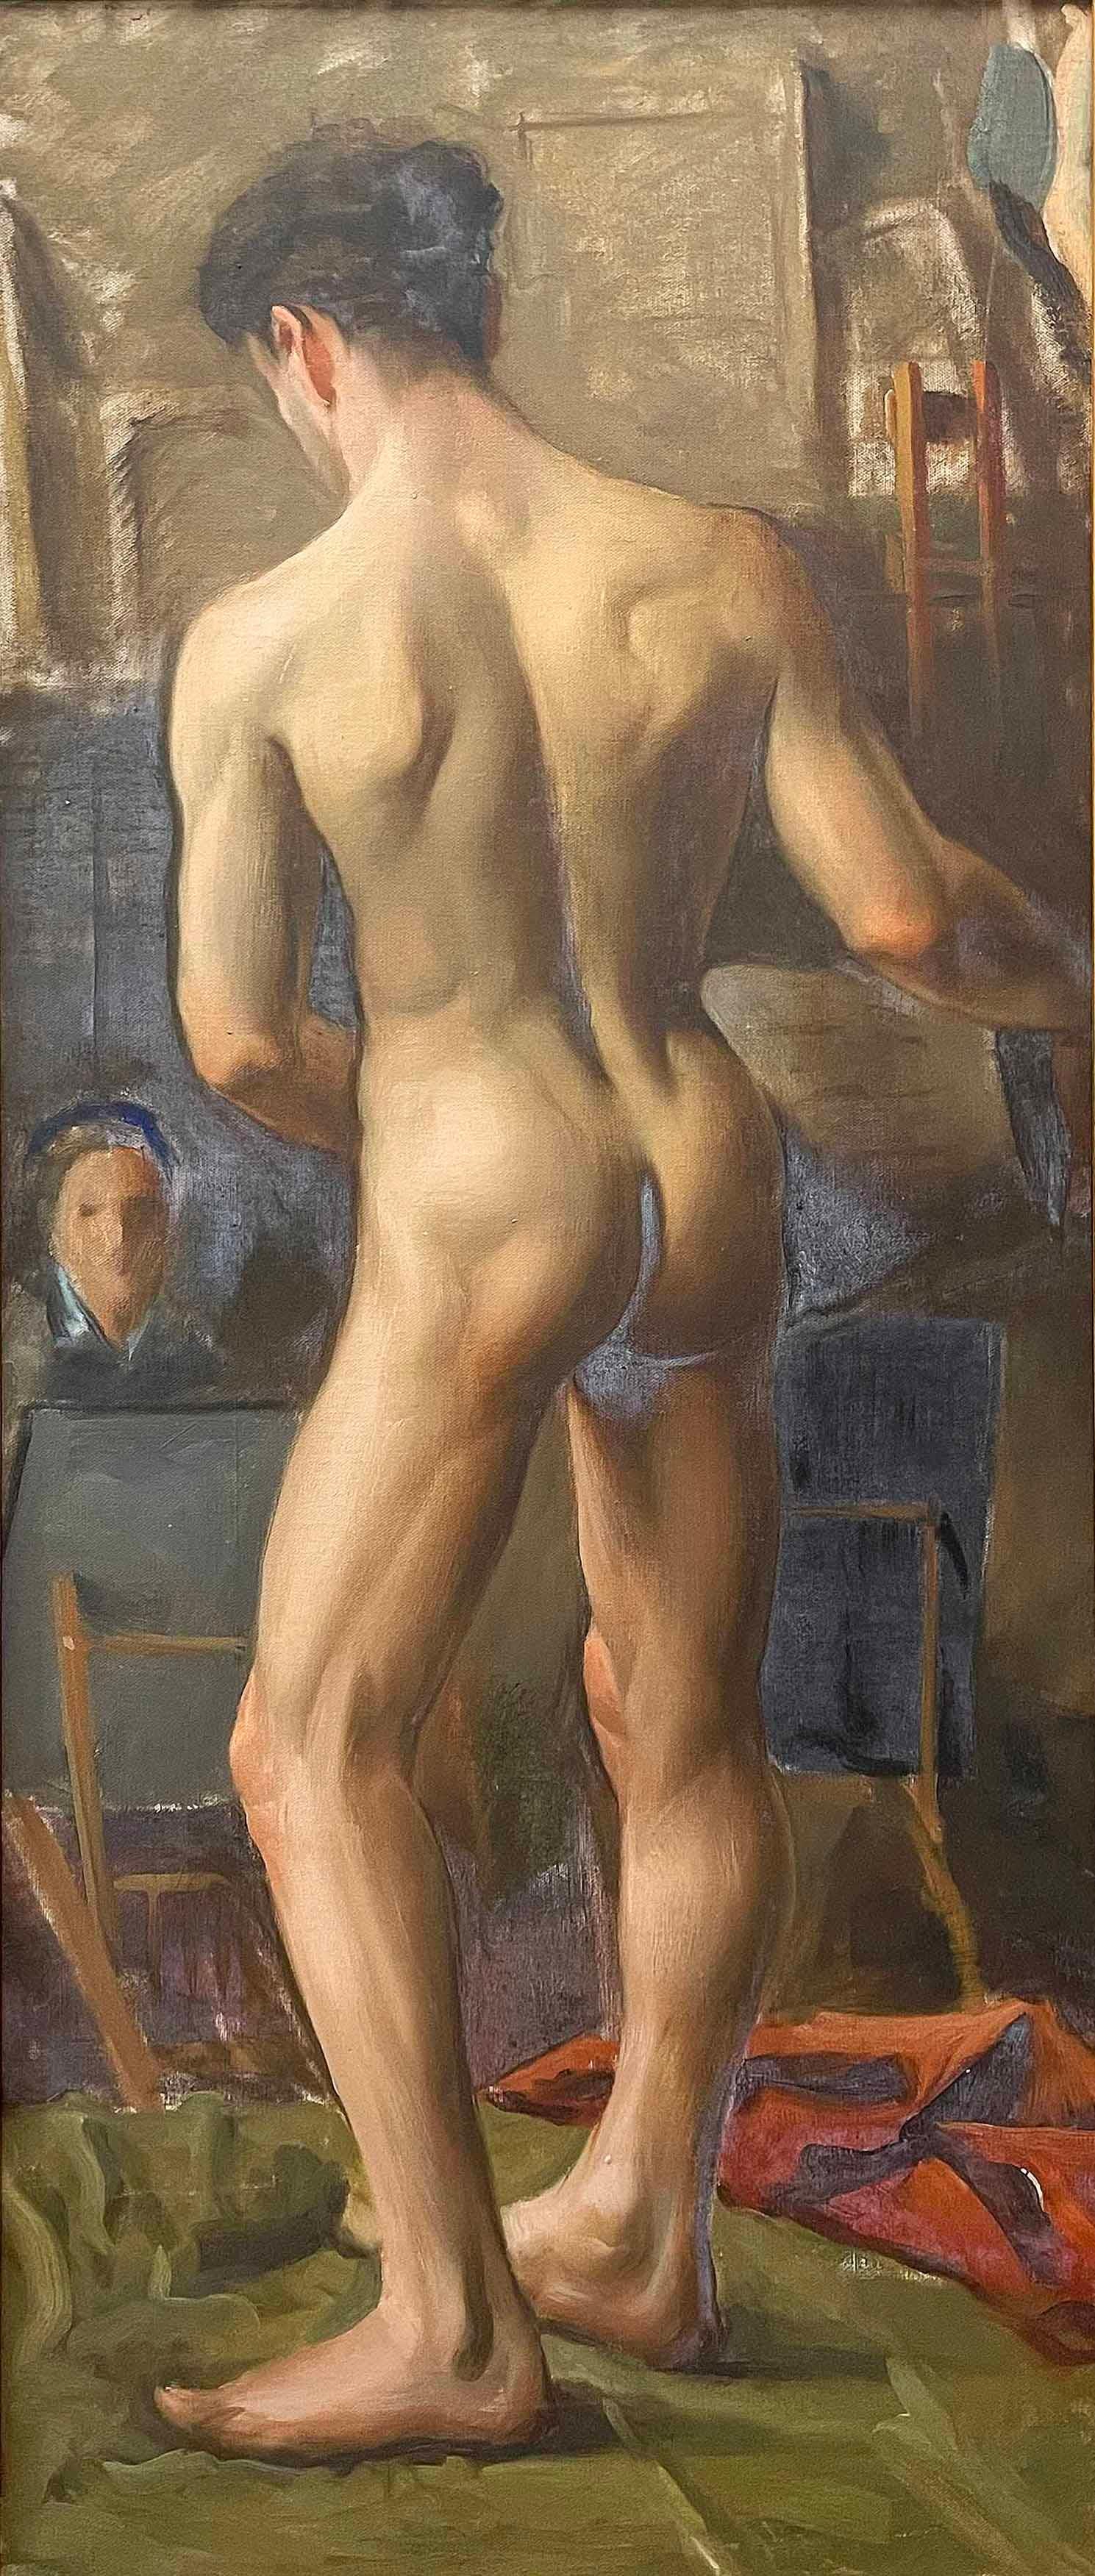 Beautifully and sensitively painted, this view of a young, nude male model, facing away from the viewer, places him in an artist's studio or atelier, with painters and their easels visible in the distance.  The painting is not signed, but the